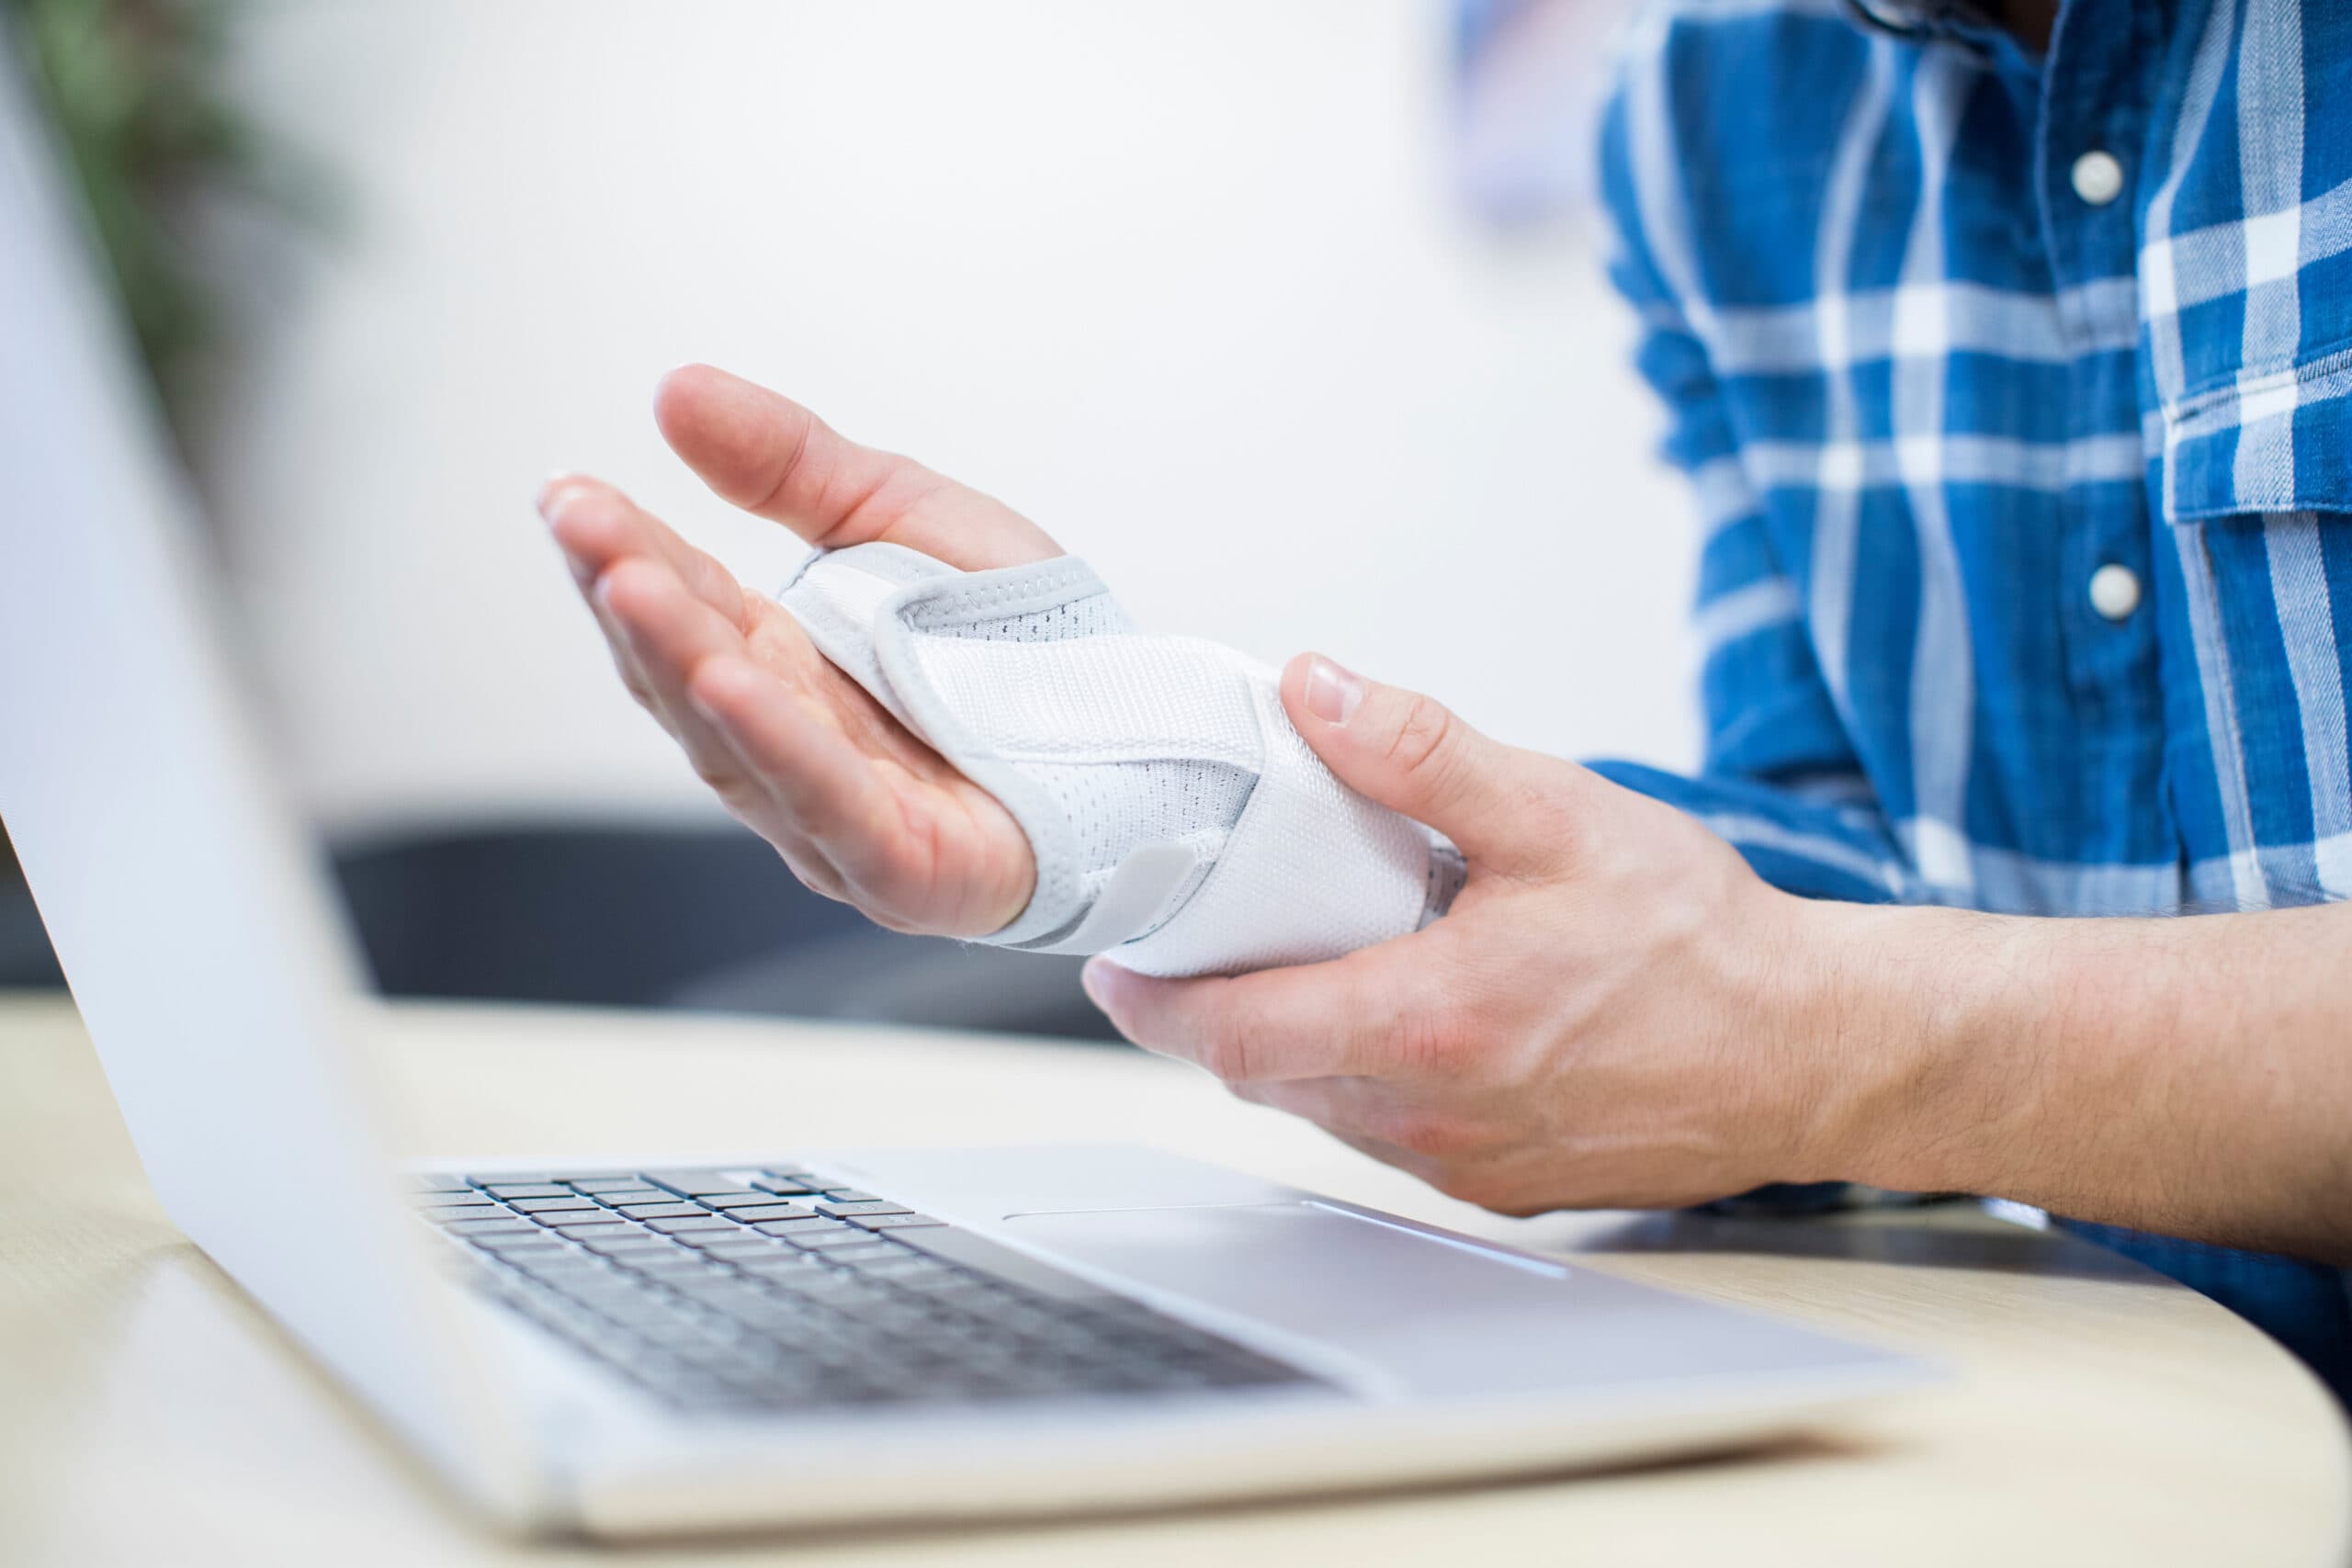 Businessman suffering from repetitive strain syndrome clutching hand that has been bandaged due to work injury